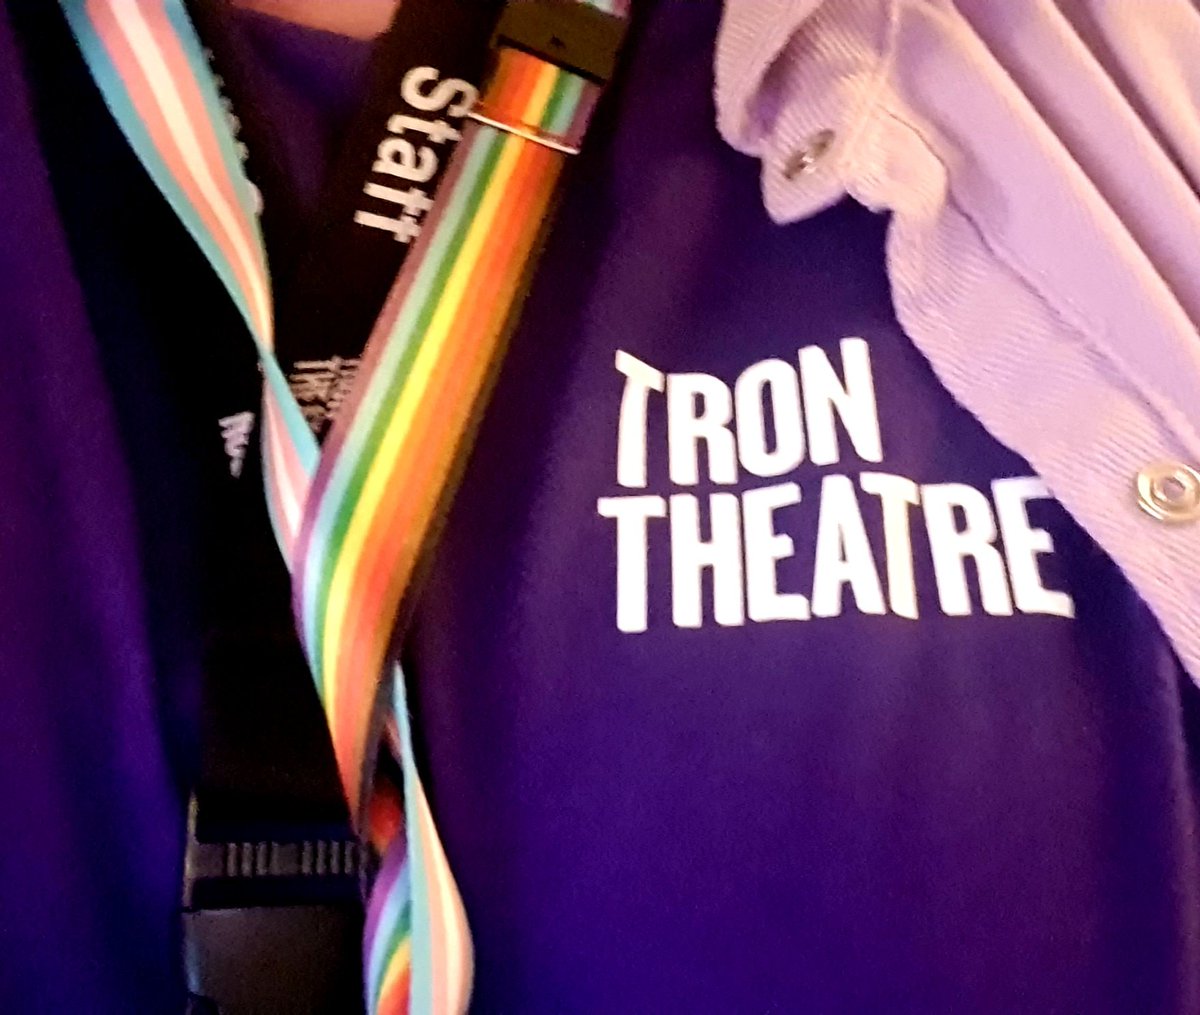 Lovely to spend the morning at @BishopbriggsAC with @TronTheatre for their #Careers event, especially since it was also #PurpleFriday @LGBTYS! Thanks for having us! 
#YouthArts #ArtsCareers #DYW #CreativeIndustries #Creativity #JobsInTheArts